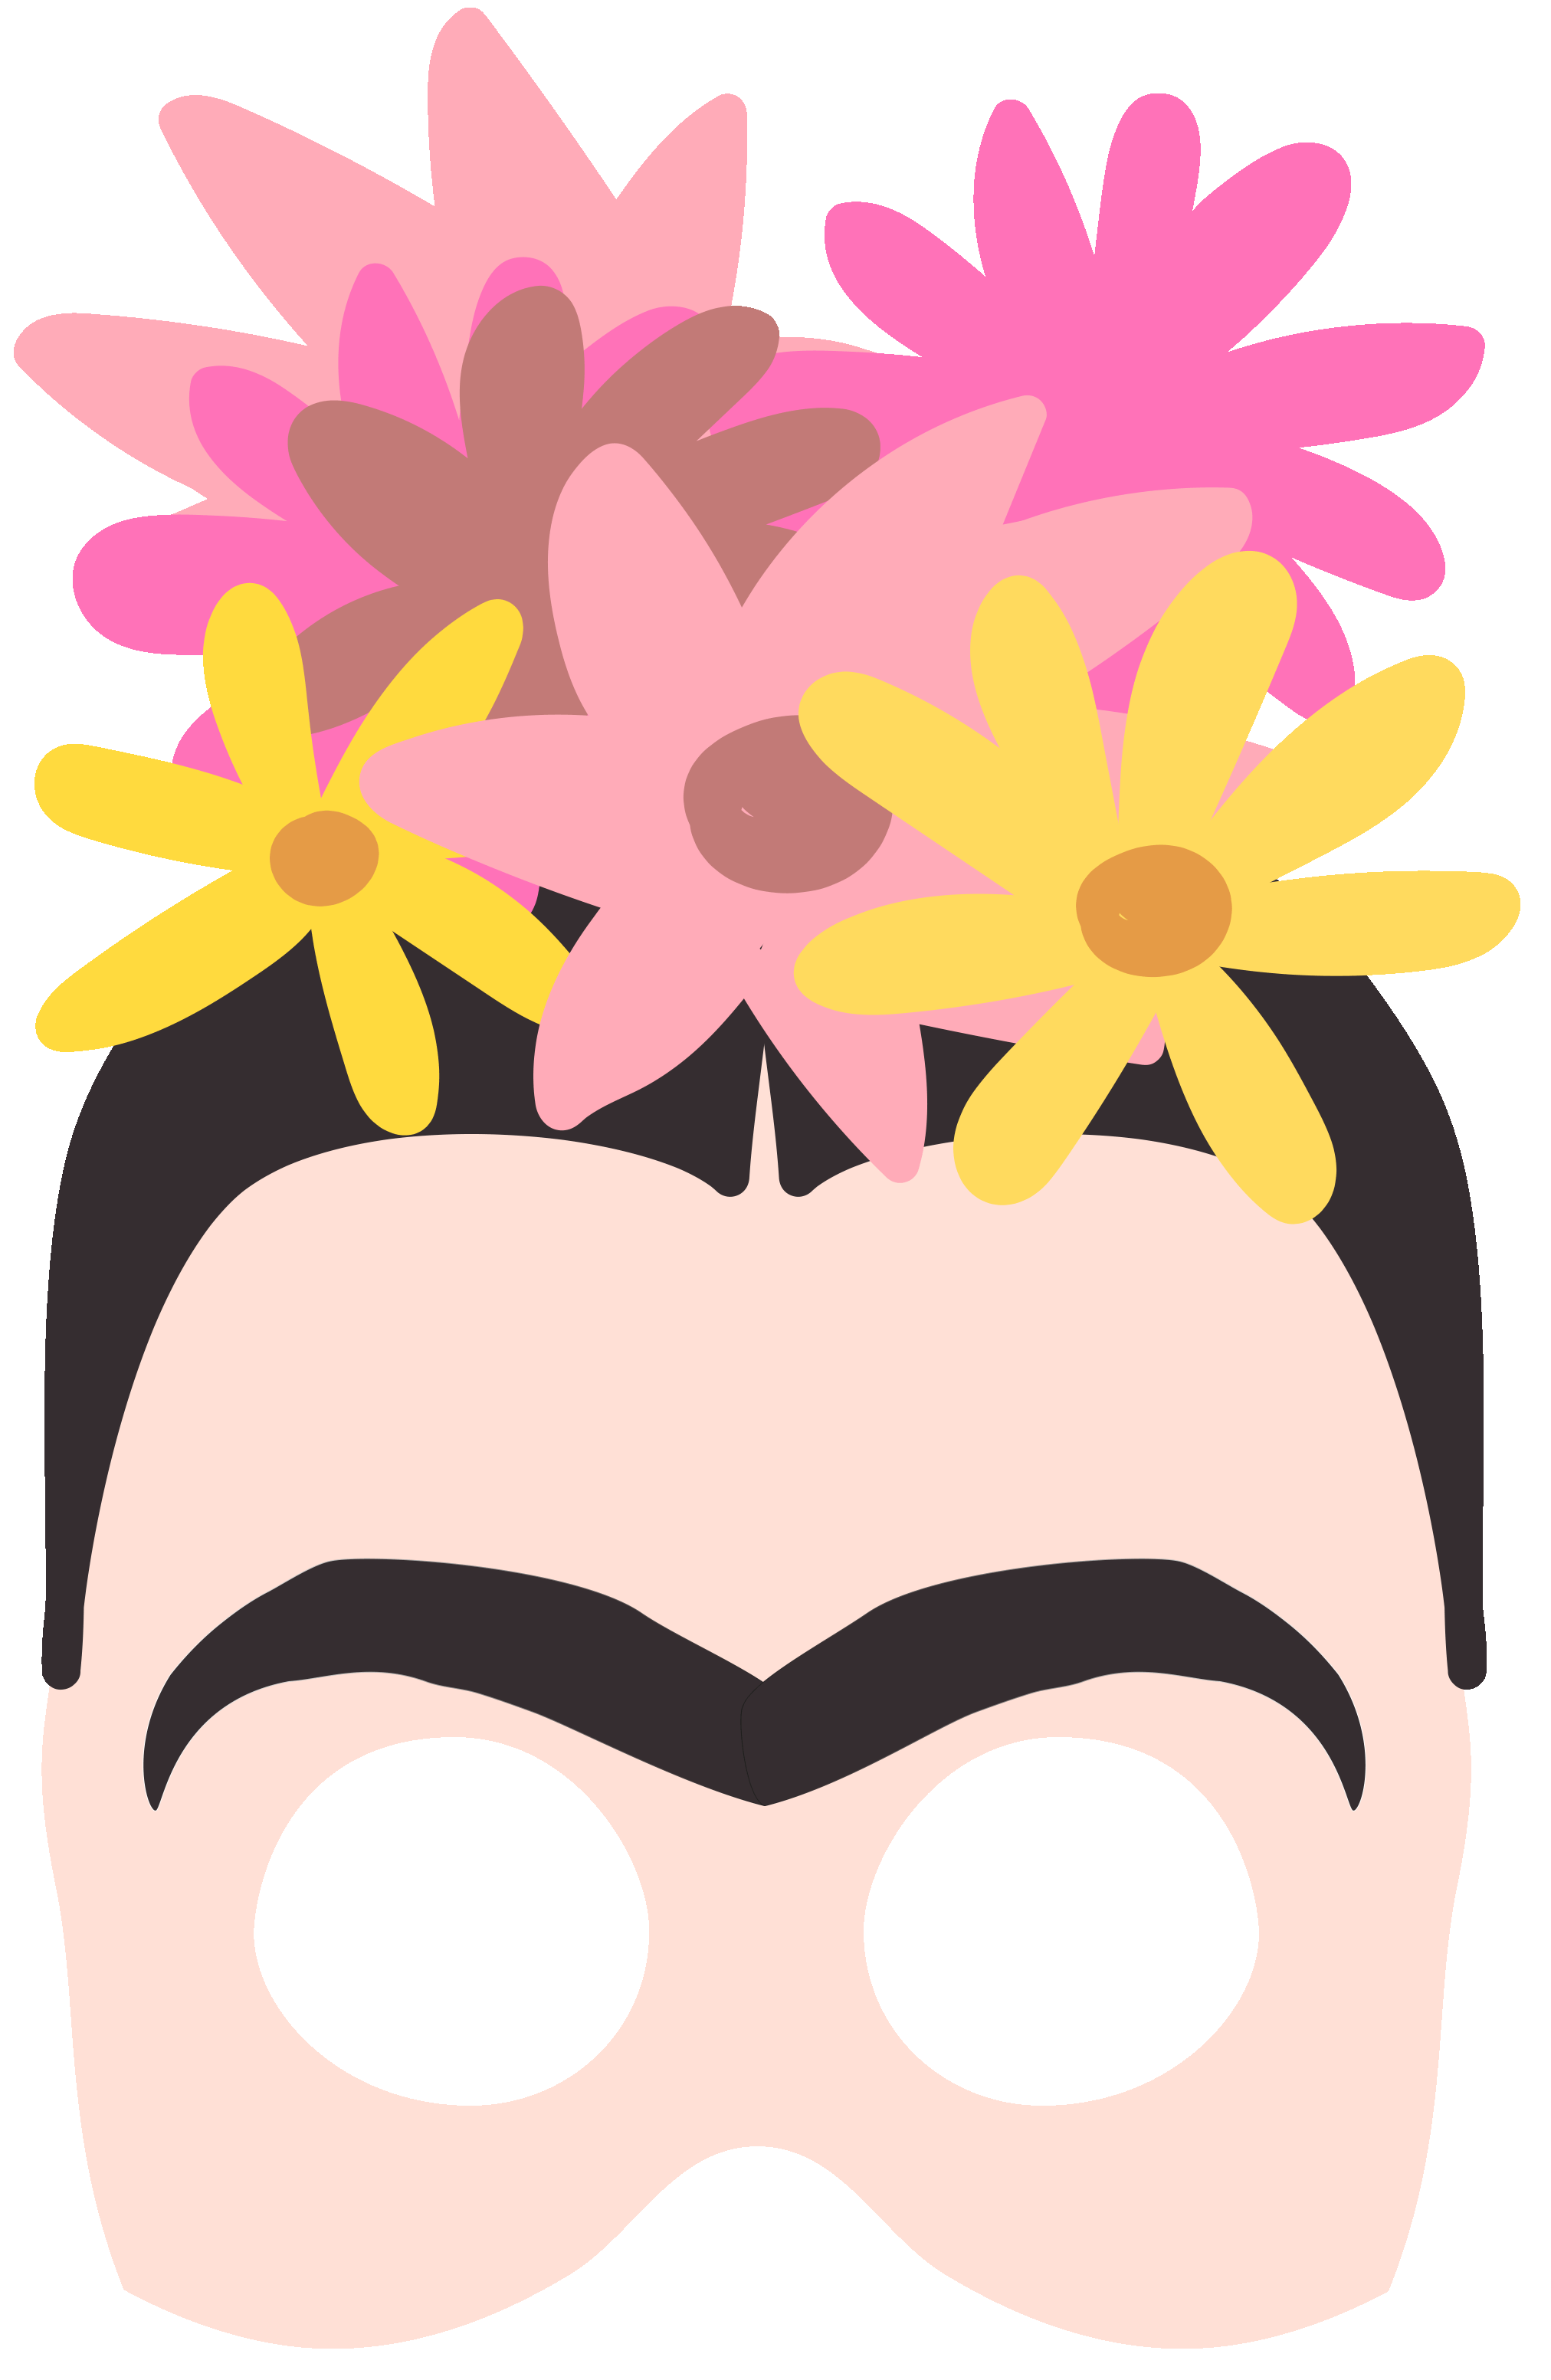 Flower Mask Sticker for iOS & Android | GIPHY